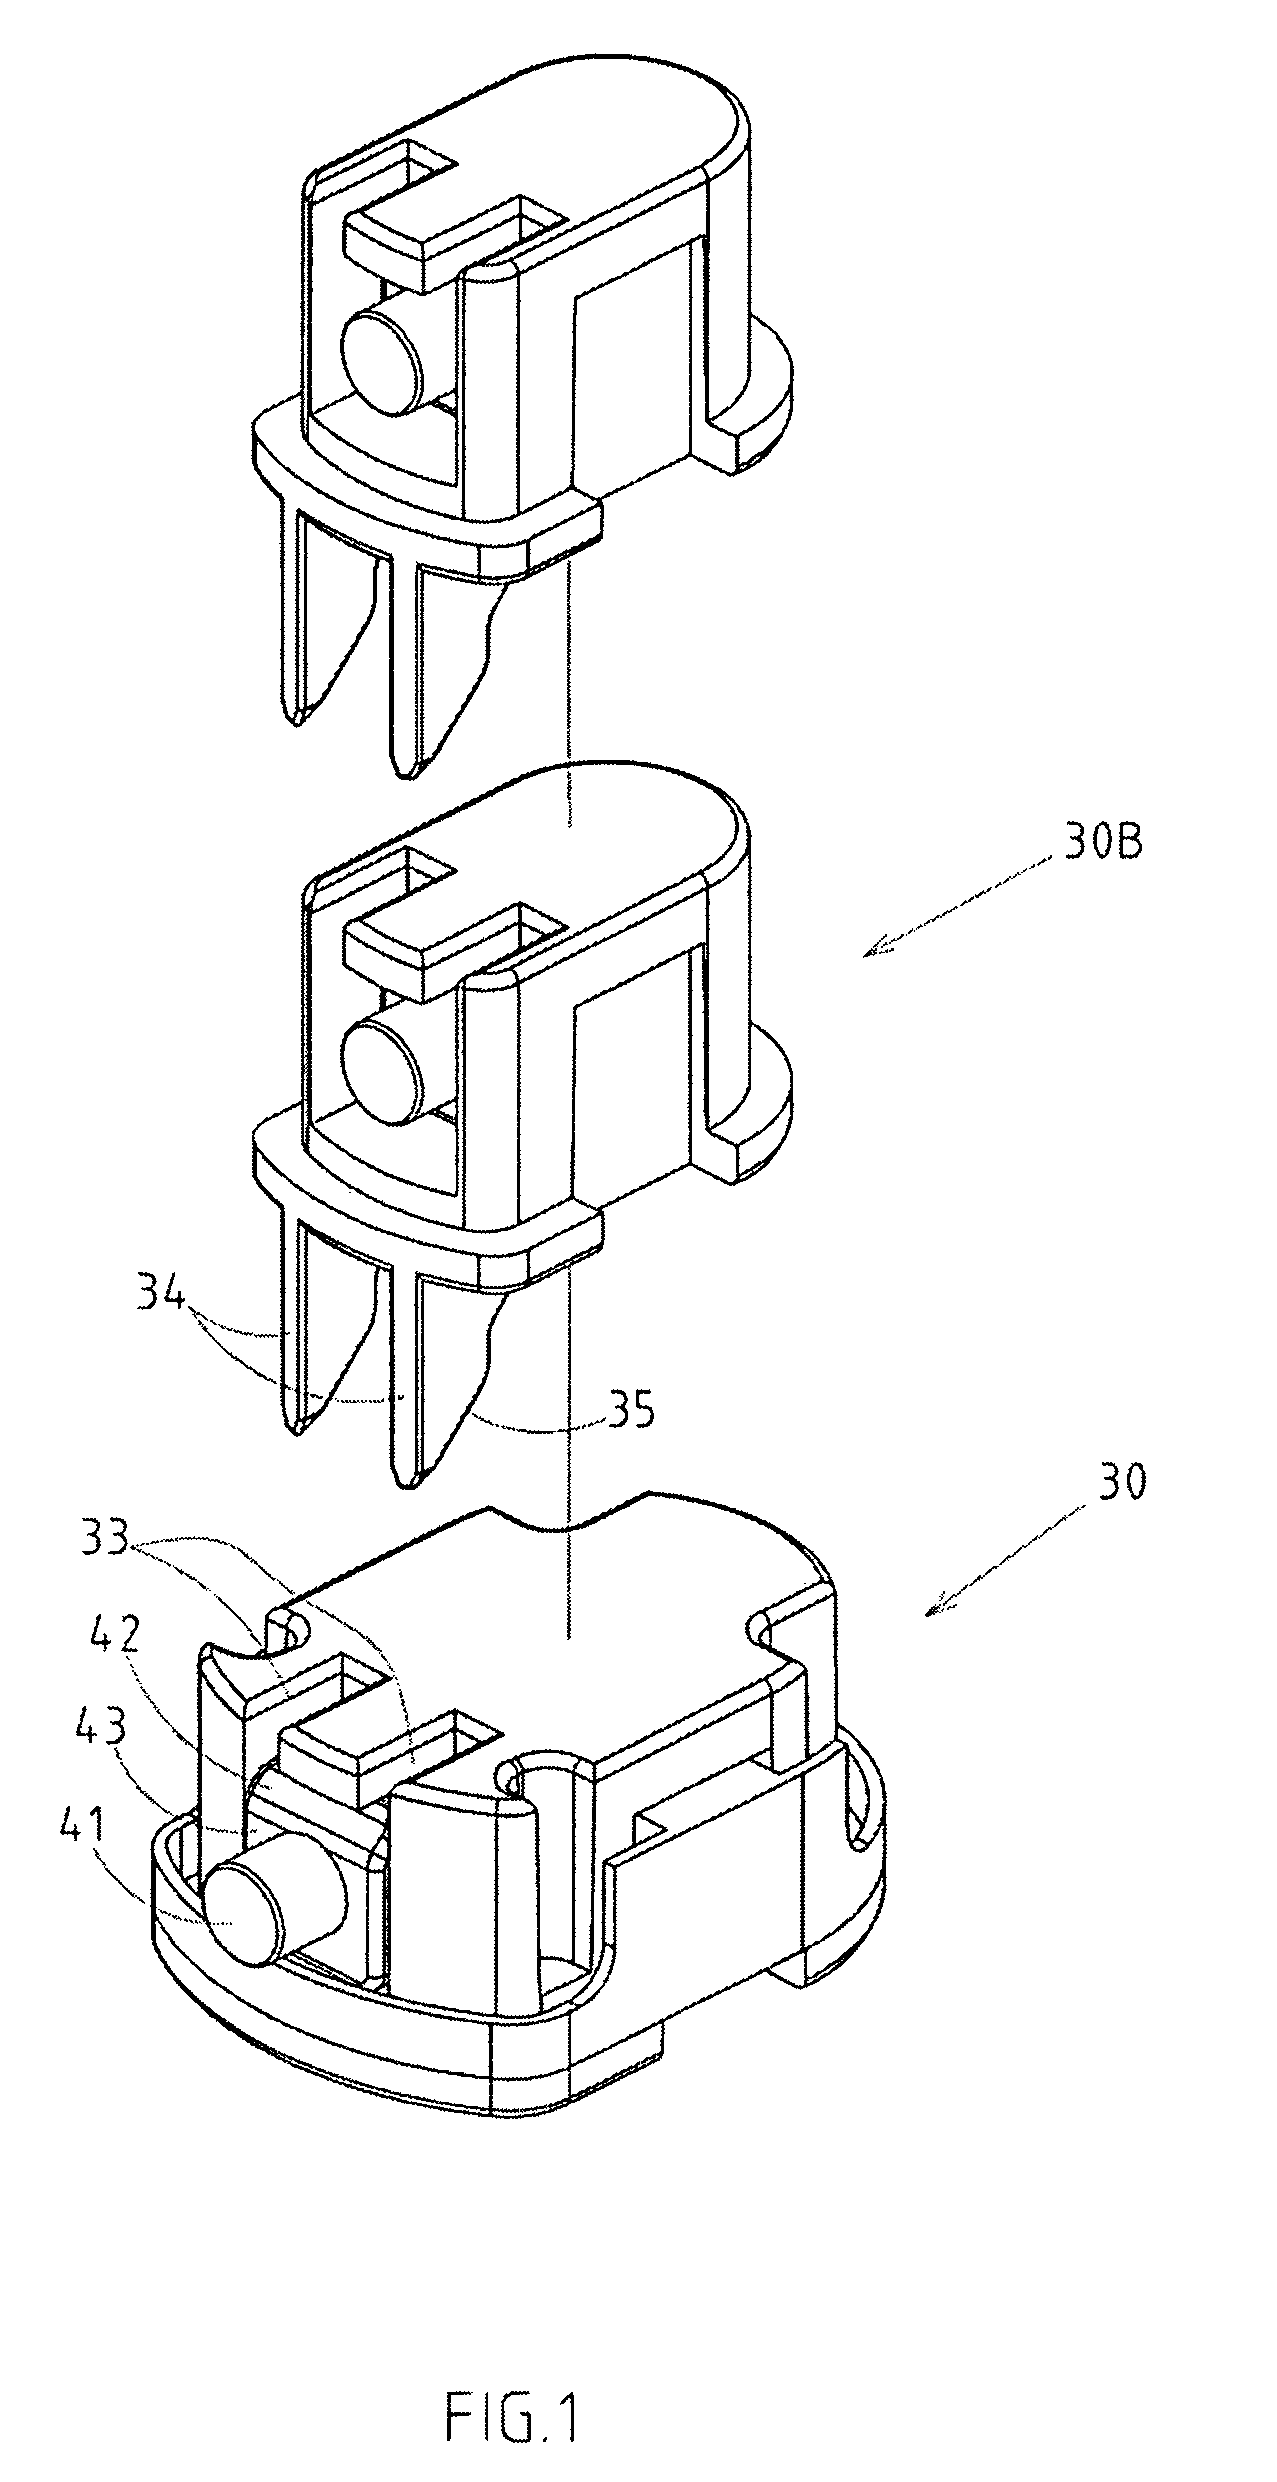 Structure of an extendable pull handle for luggage